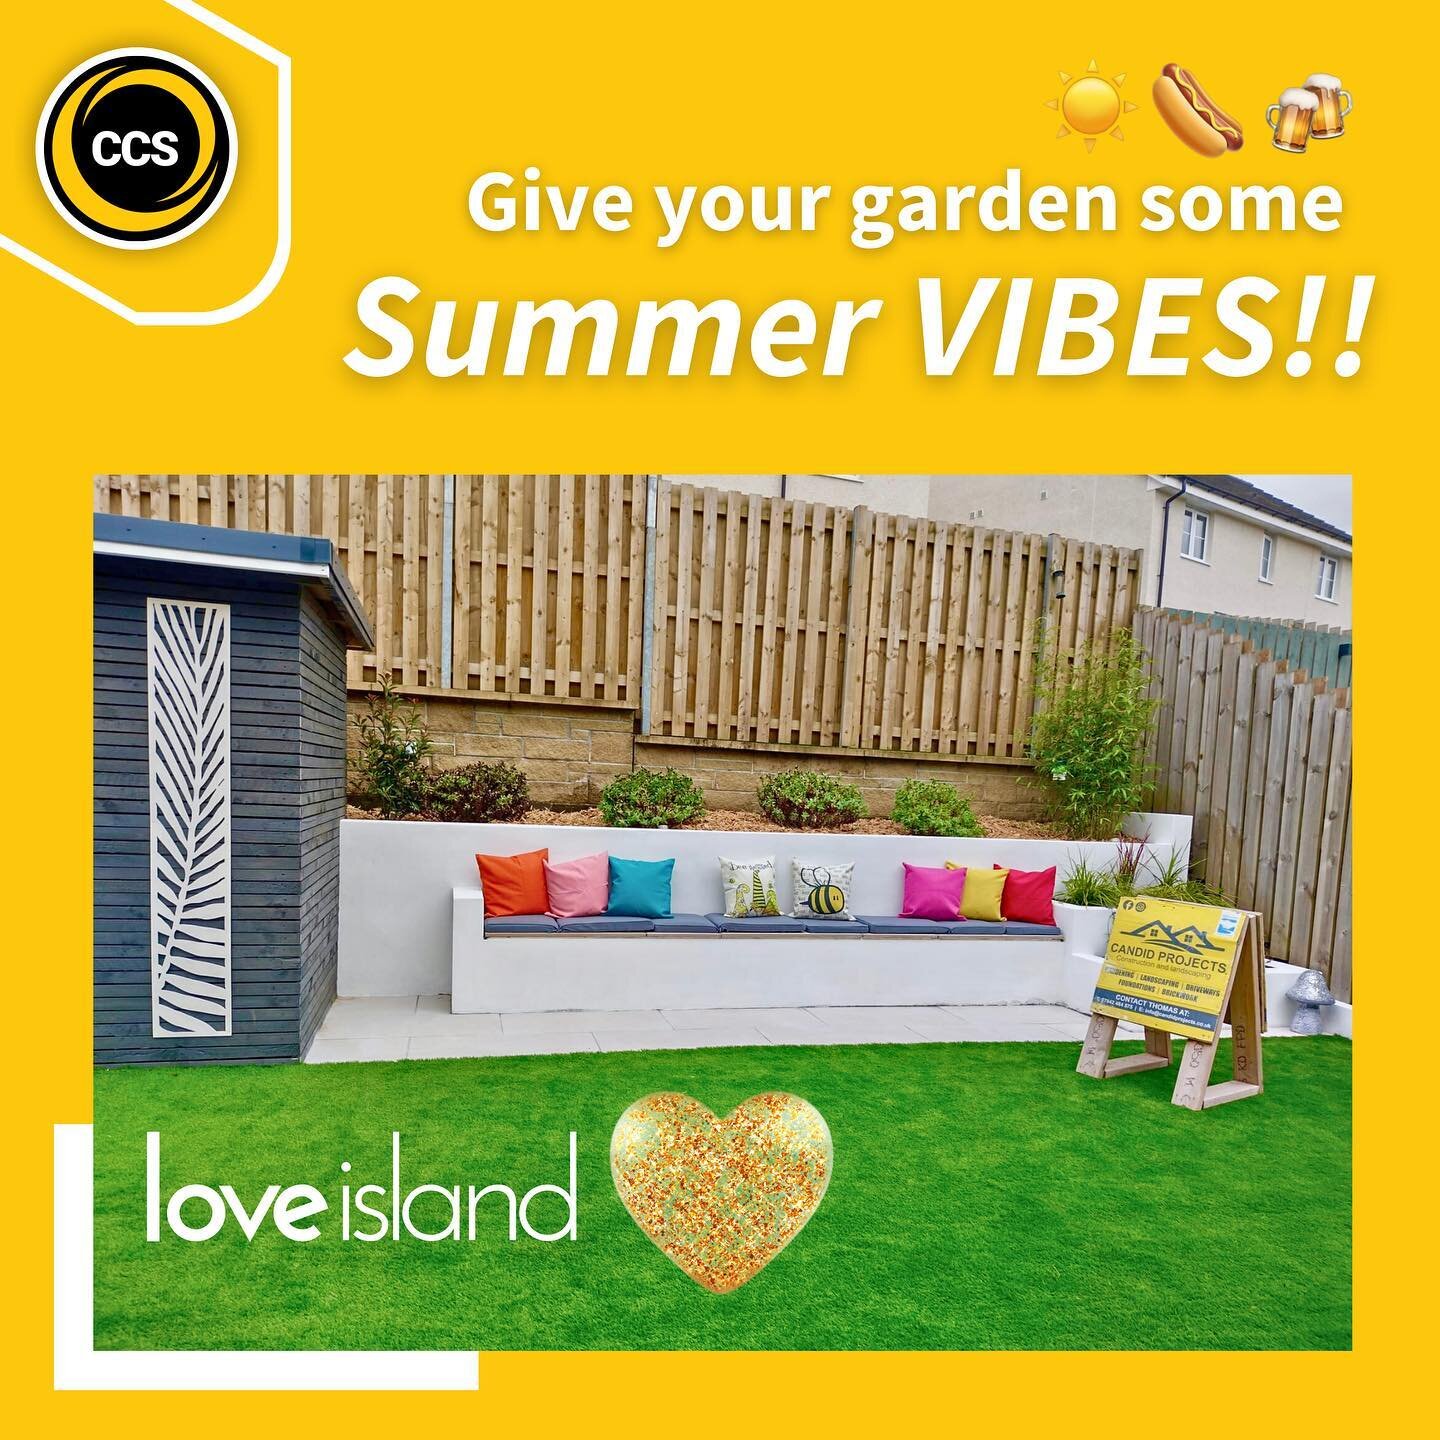 Give your garden some Love Island vibes this summer! 😎☀️🍻🥂🌭

candidconstructionscotland.com | 07523398891 📞